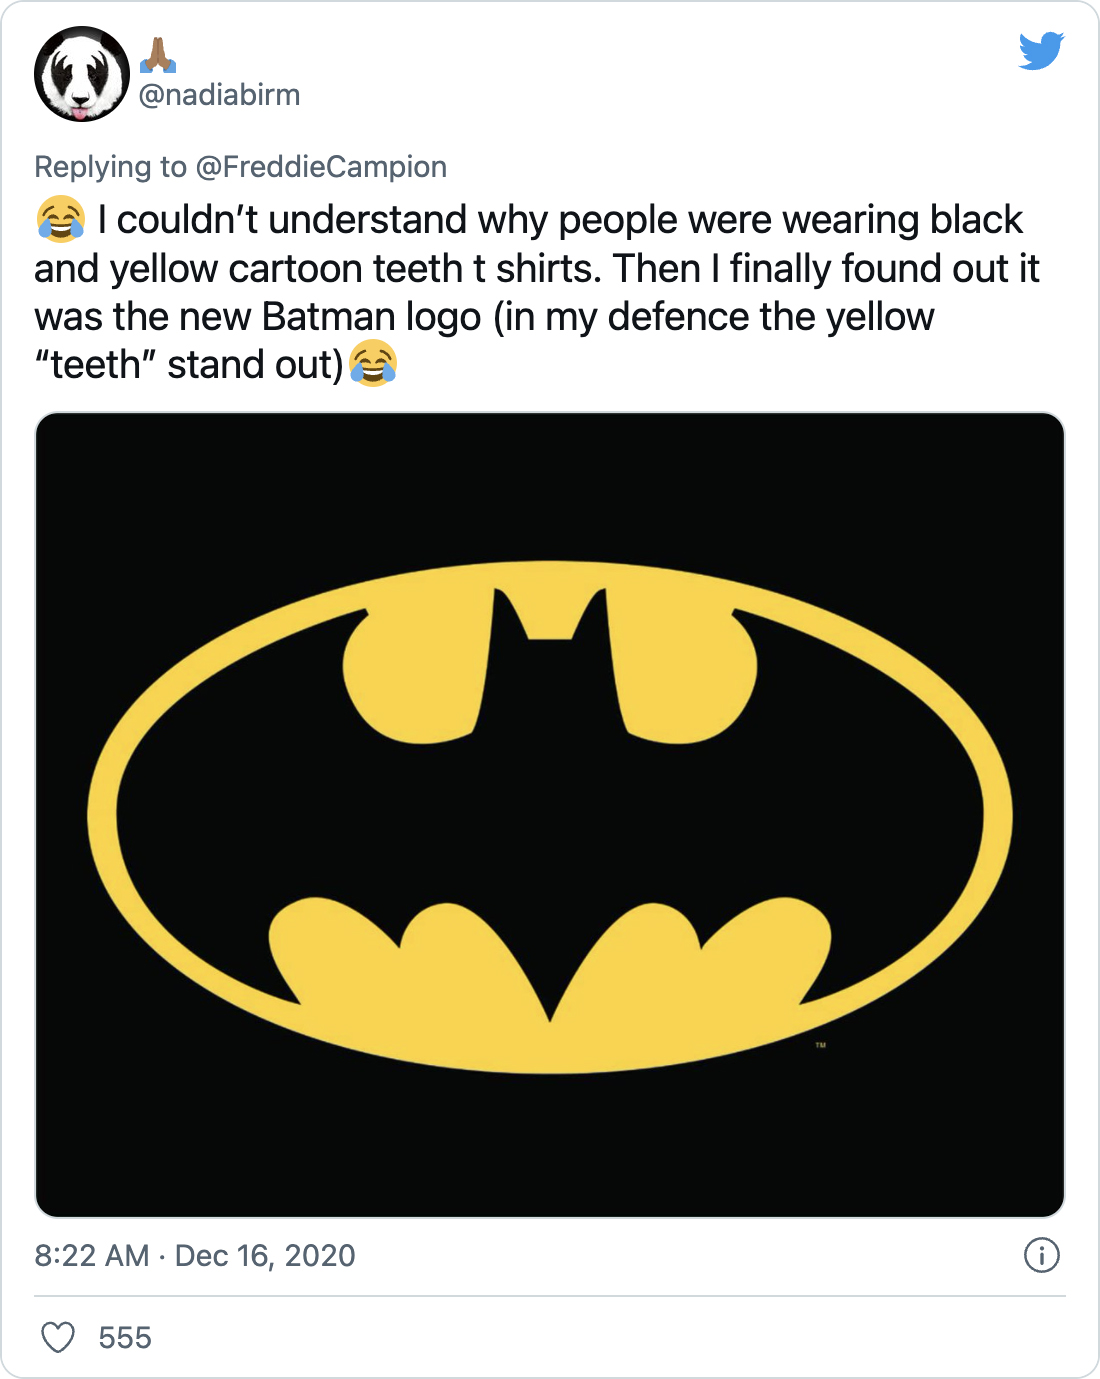 😂 I couldn’t understand why people were wearing black and yellow cartoon teeth t shirts. Then I finally found out it was the new Batman logo (in my defence the yellow “teeth” stand out)😂 - @nadiabirm